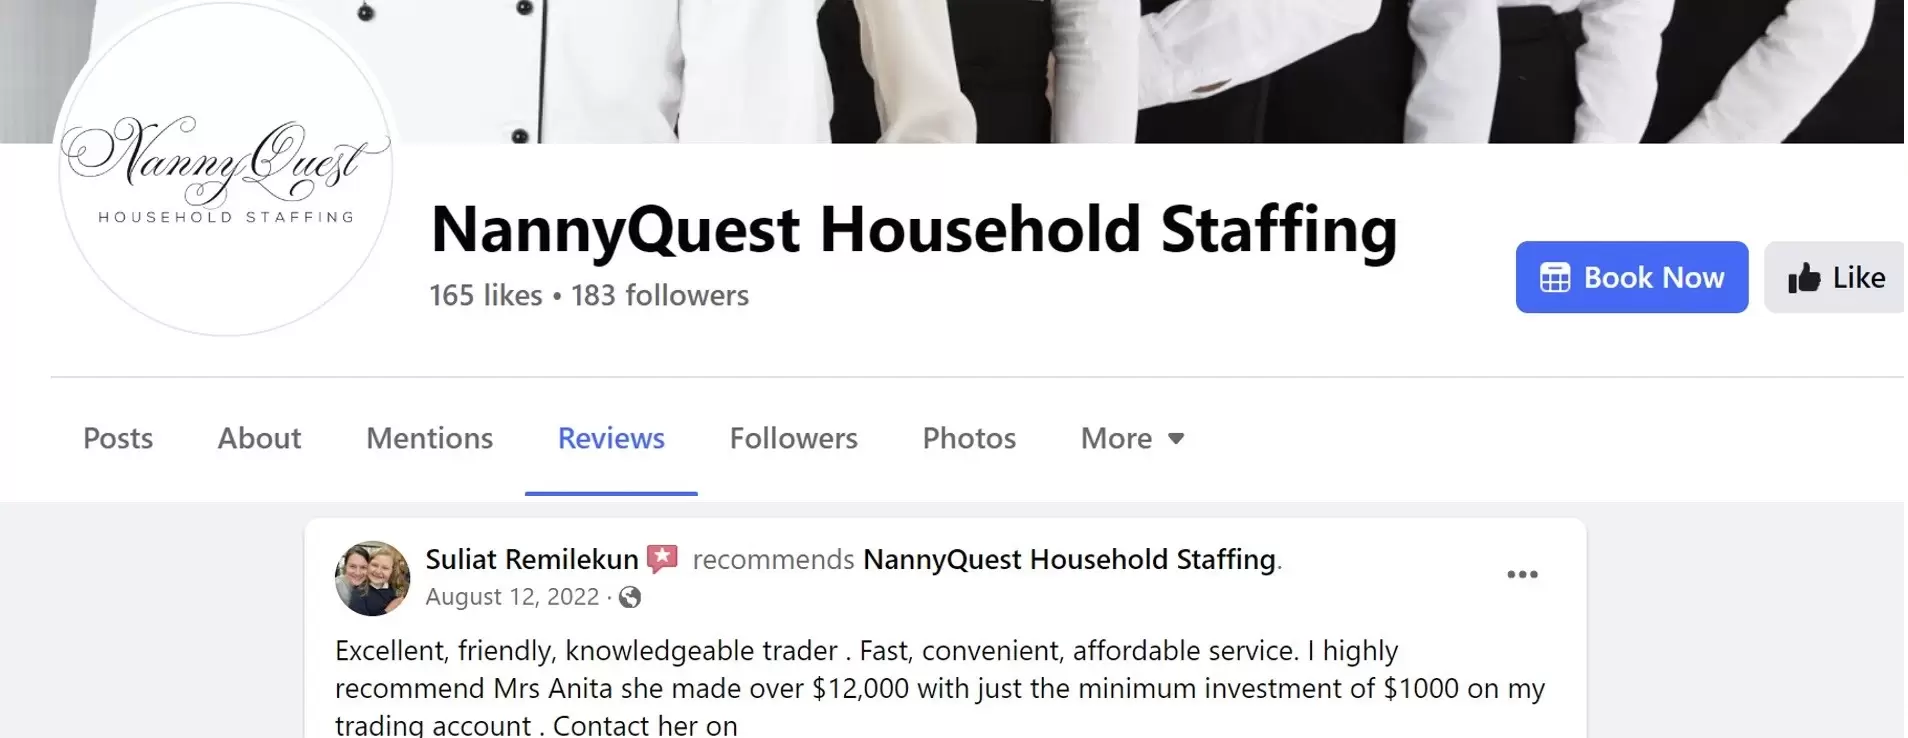 positive review of NannyQuest Household Staffing